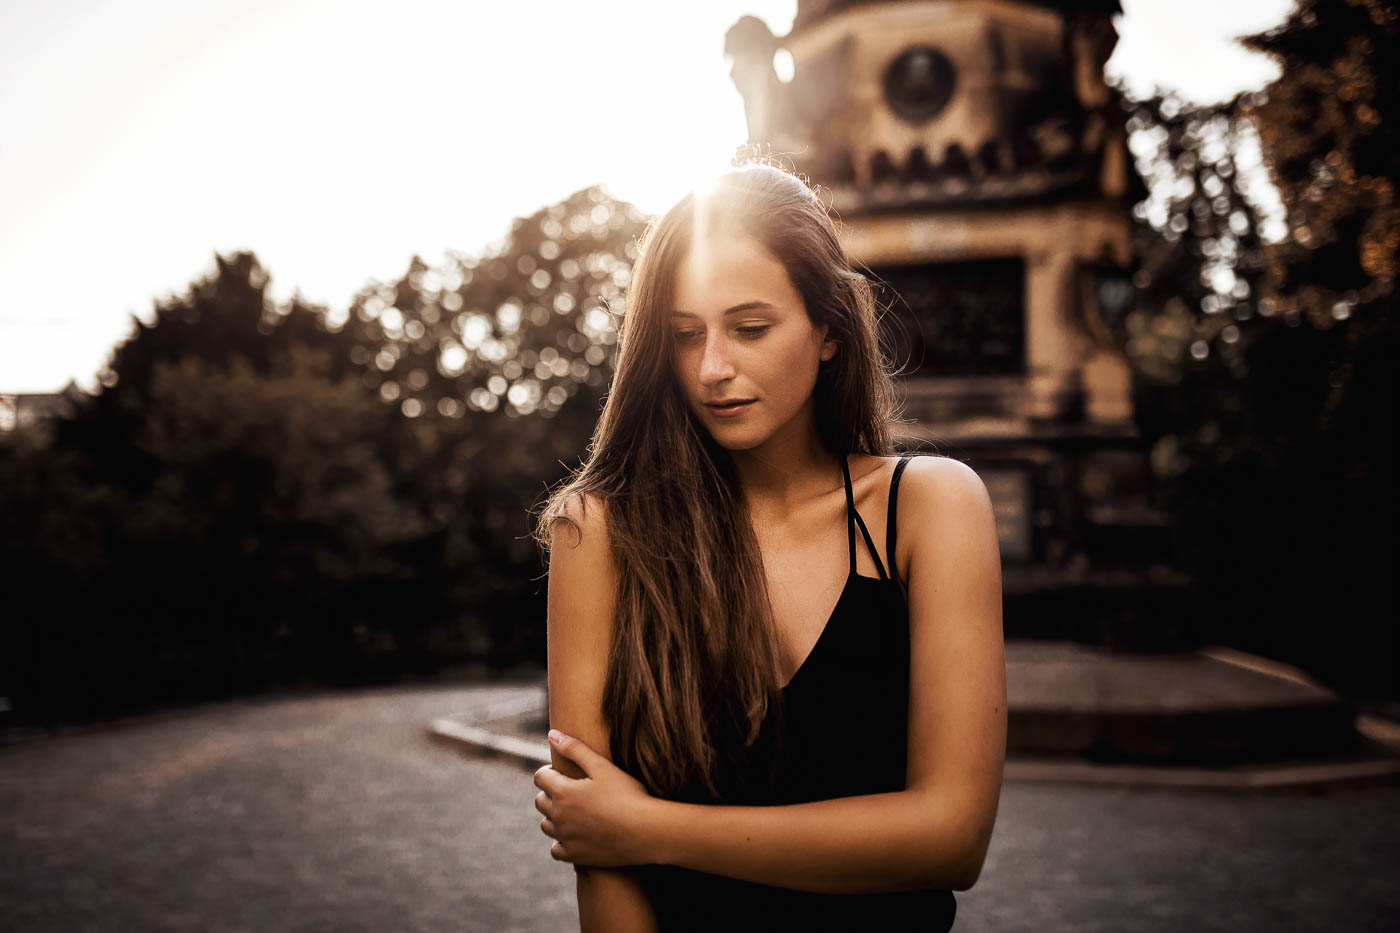 Anna-Lisa Portrait-Shooting in Magdeburg